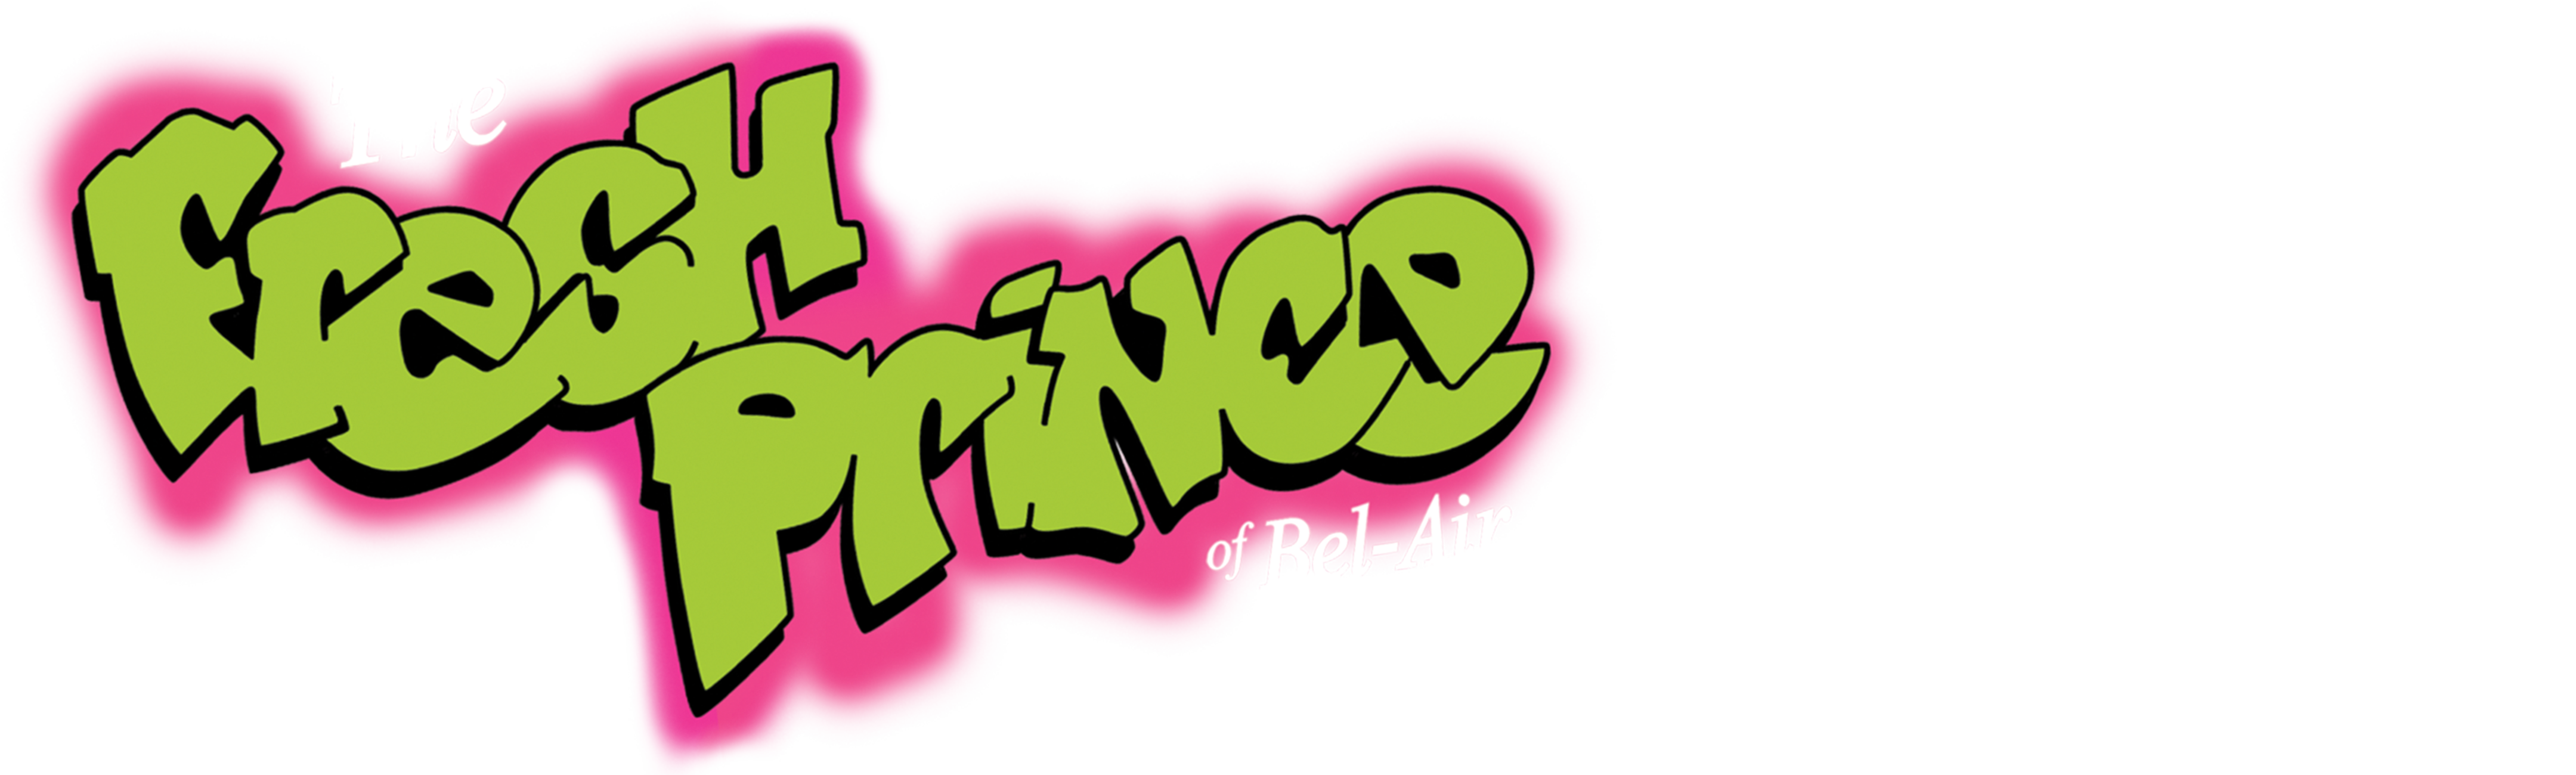 Watch The Fresh Prince of Bel-Air